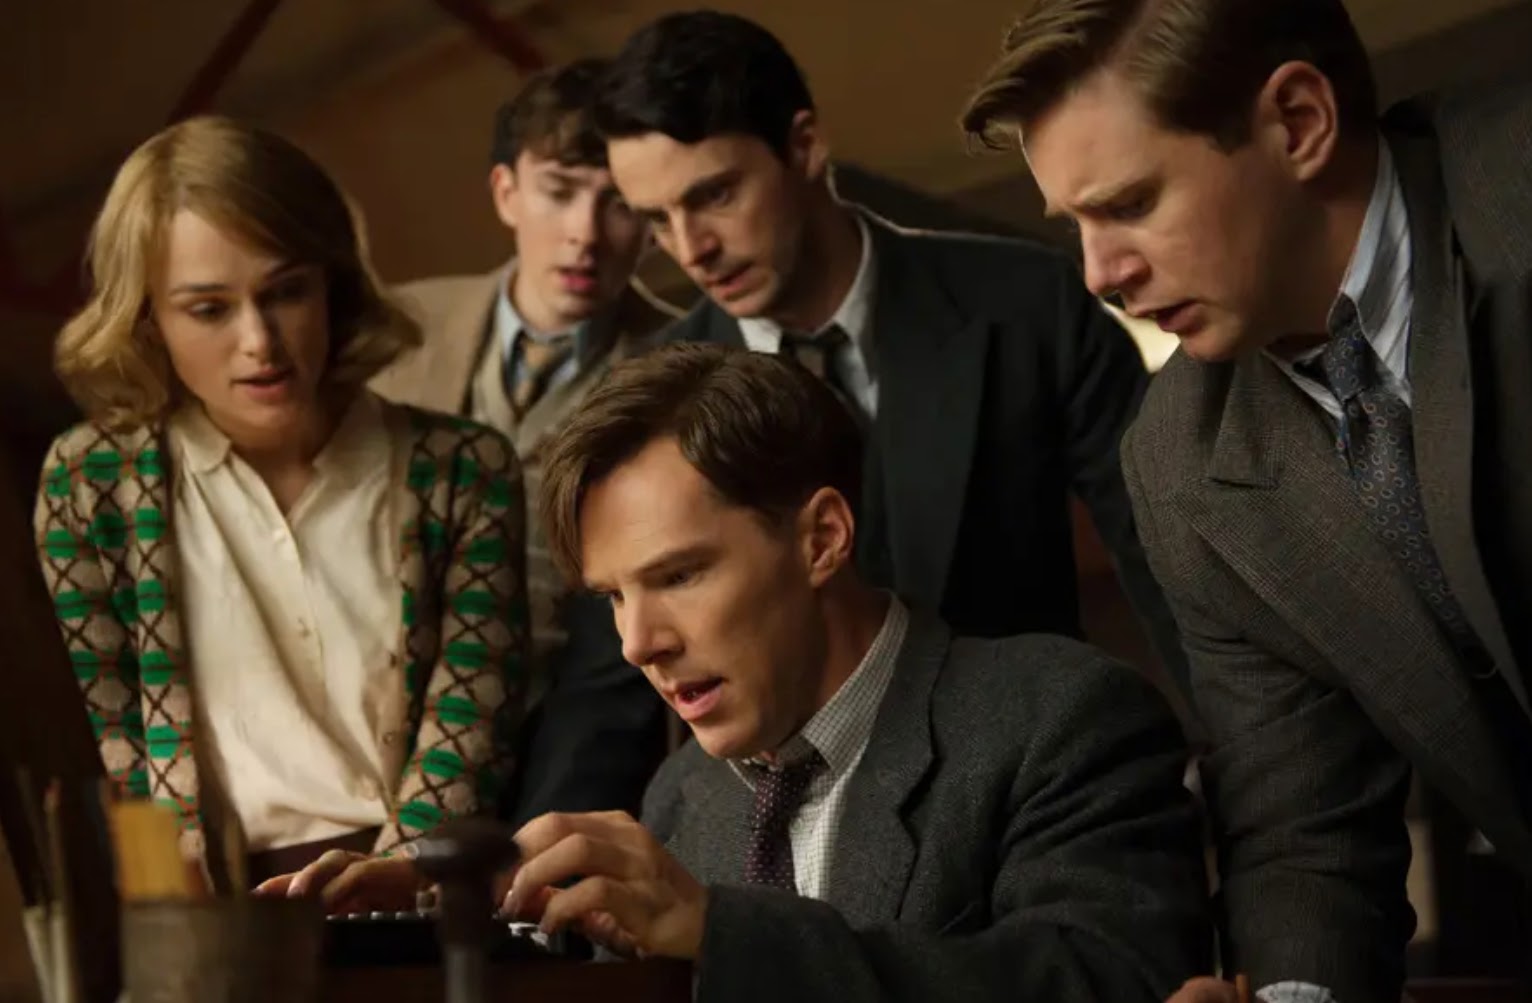 The Imitation Game with Benedict Cumberbatch starring as Bletchley Park codebreaker Alan Turingn